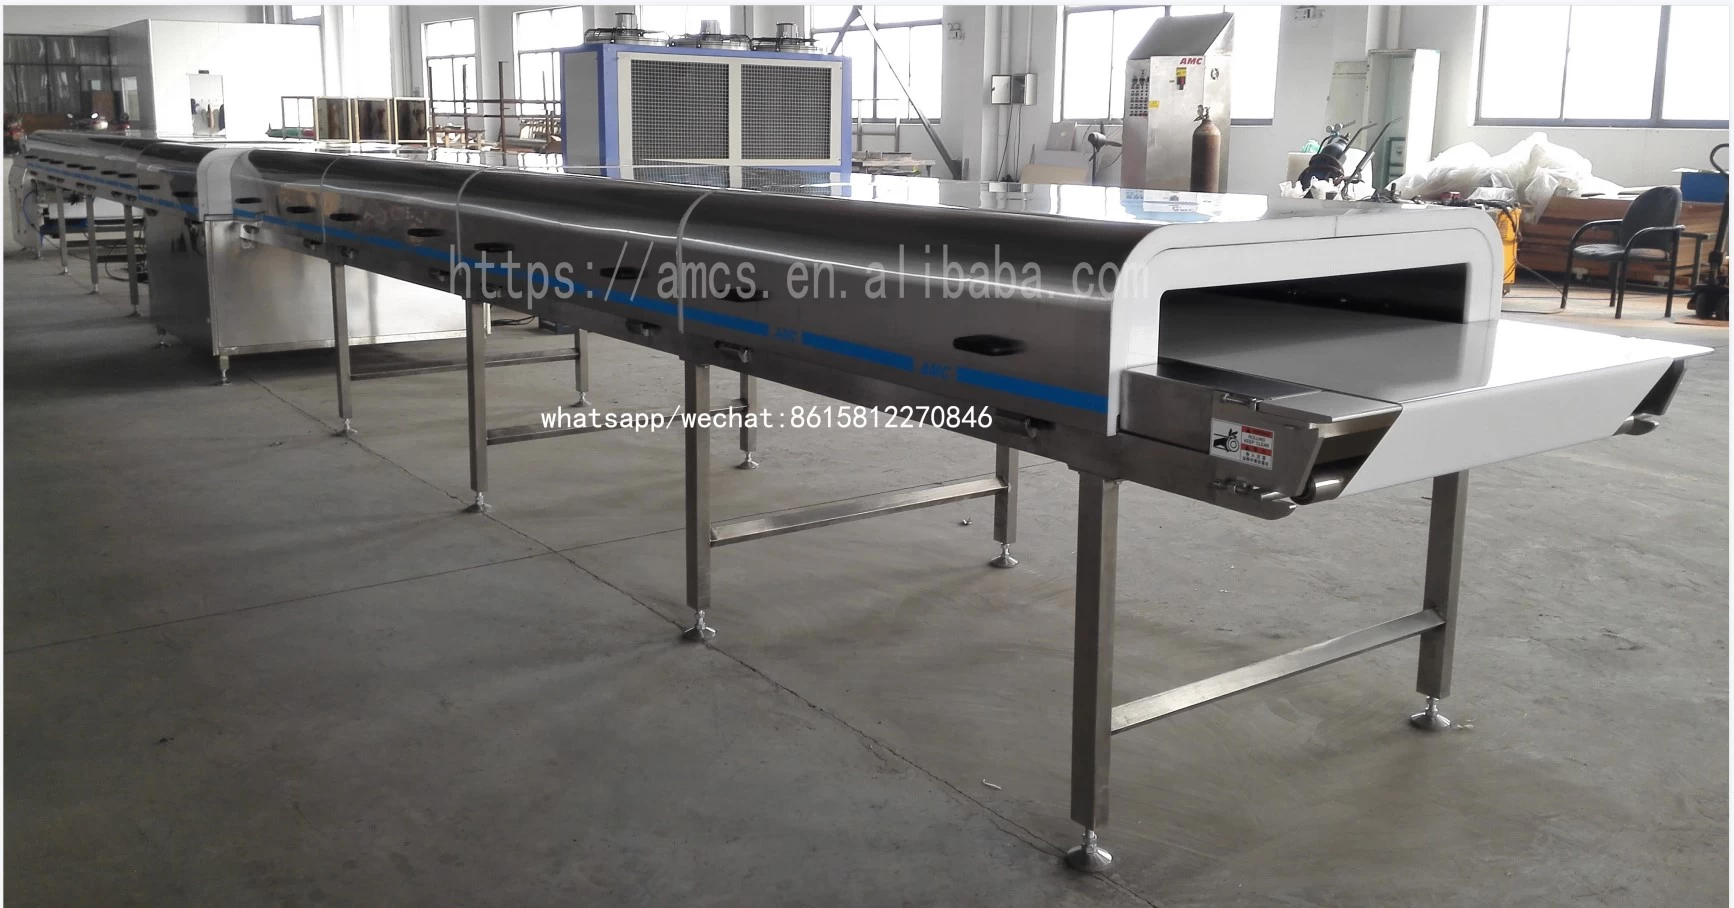 Cooling Tunnel Conveyor - Wholesale Suppliers